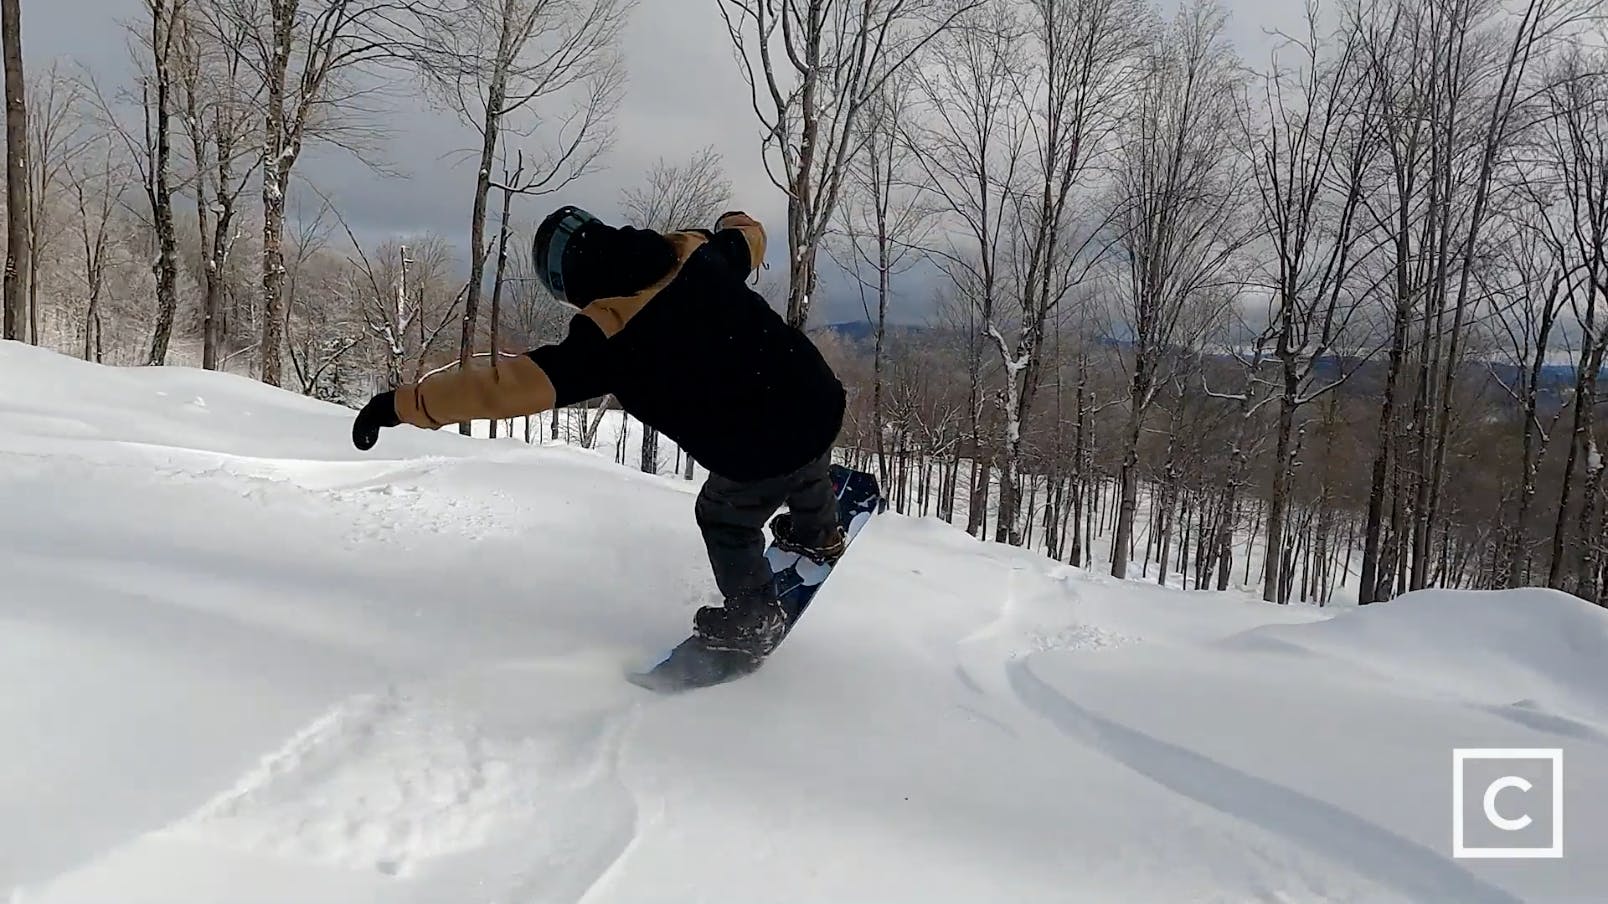 Curated expert Colby Henderson buttering in fresh snow with the Lib Tech Orca